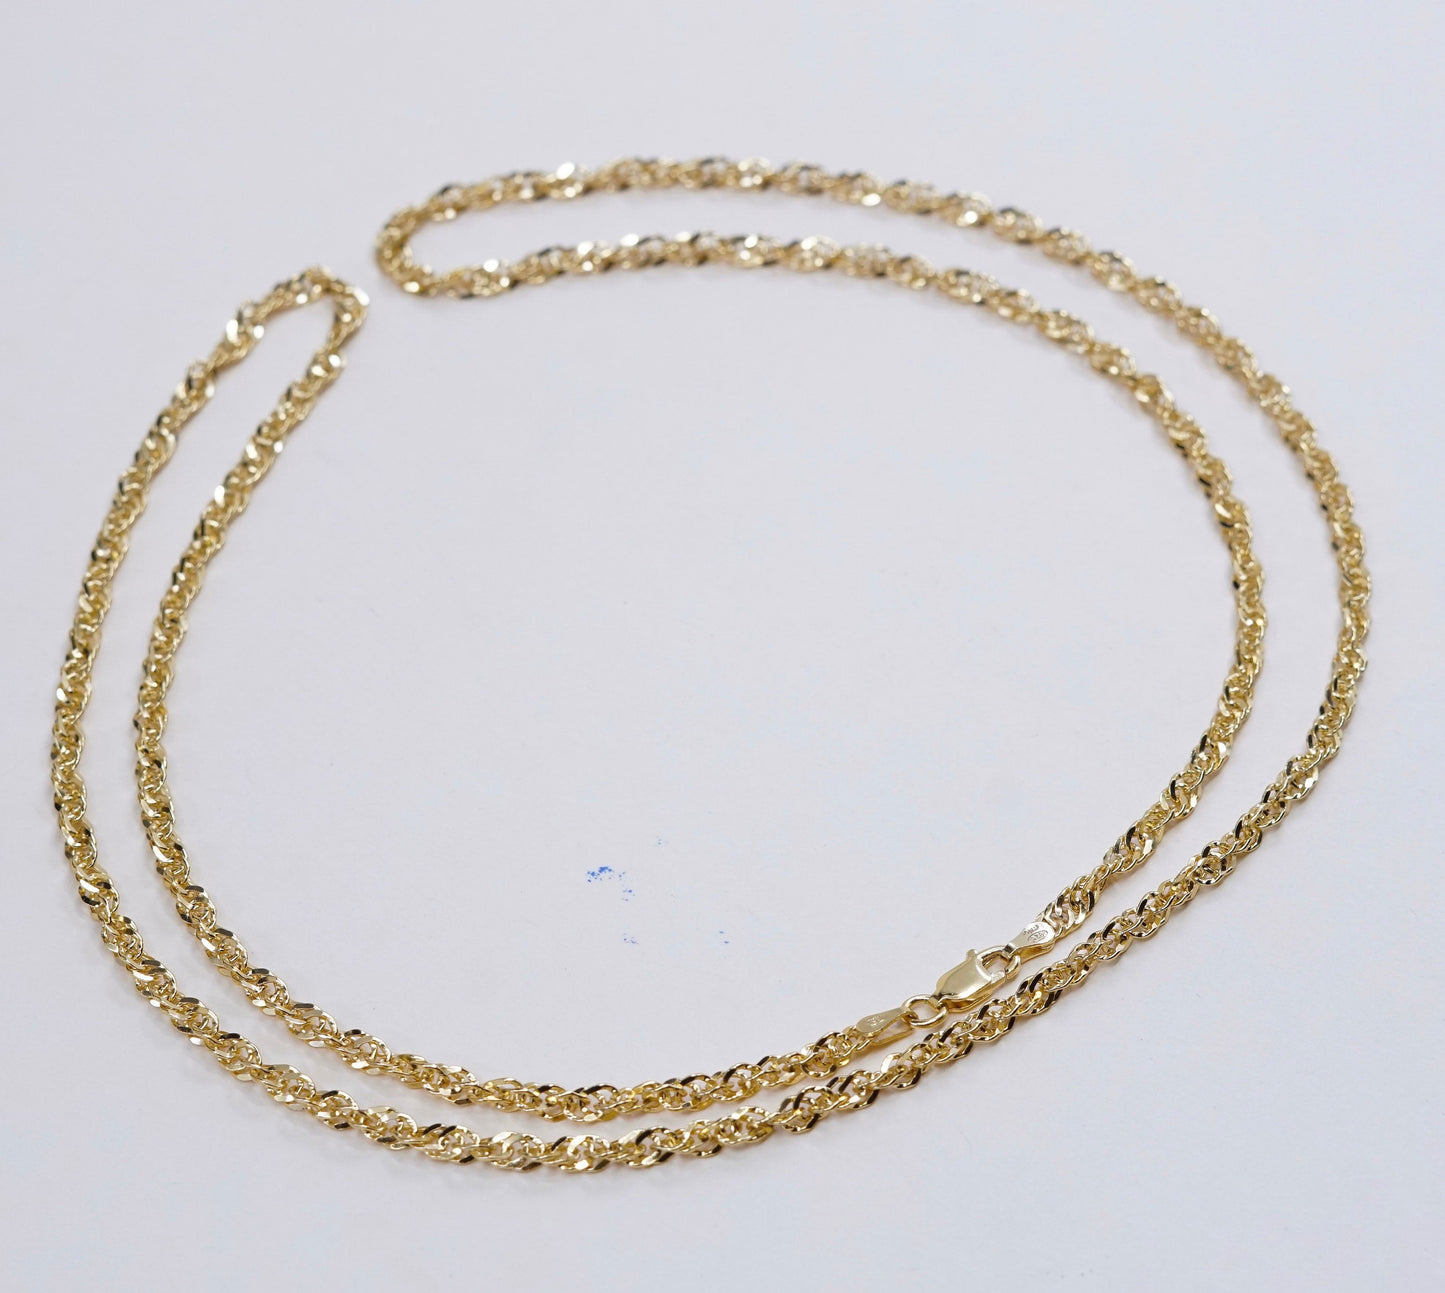 30”, 3mm, Milor vermeil gold sterling silver Italy 925 singapore chain necklace